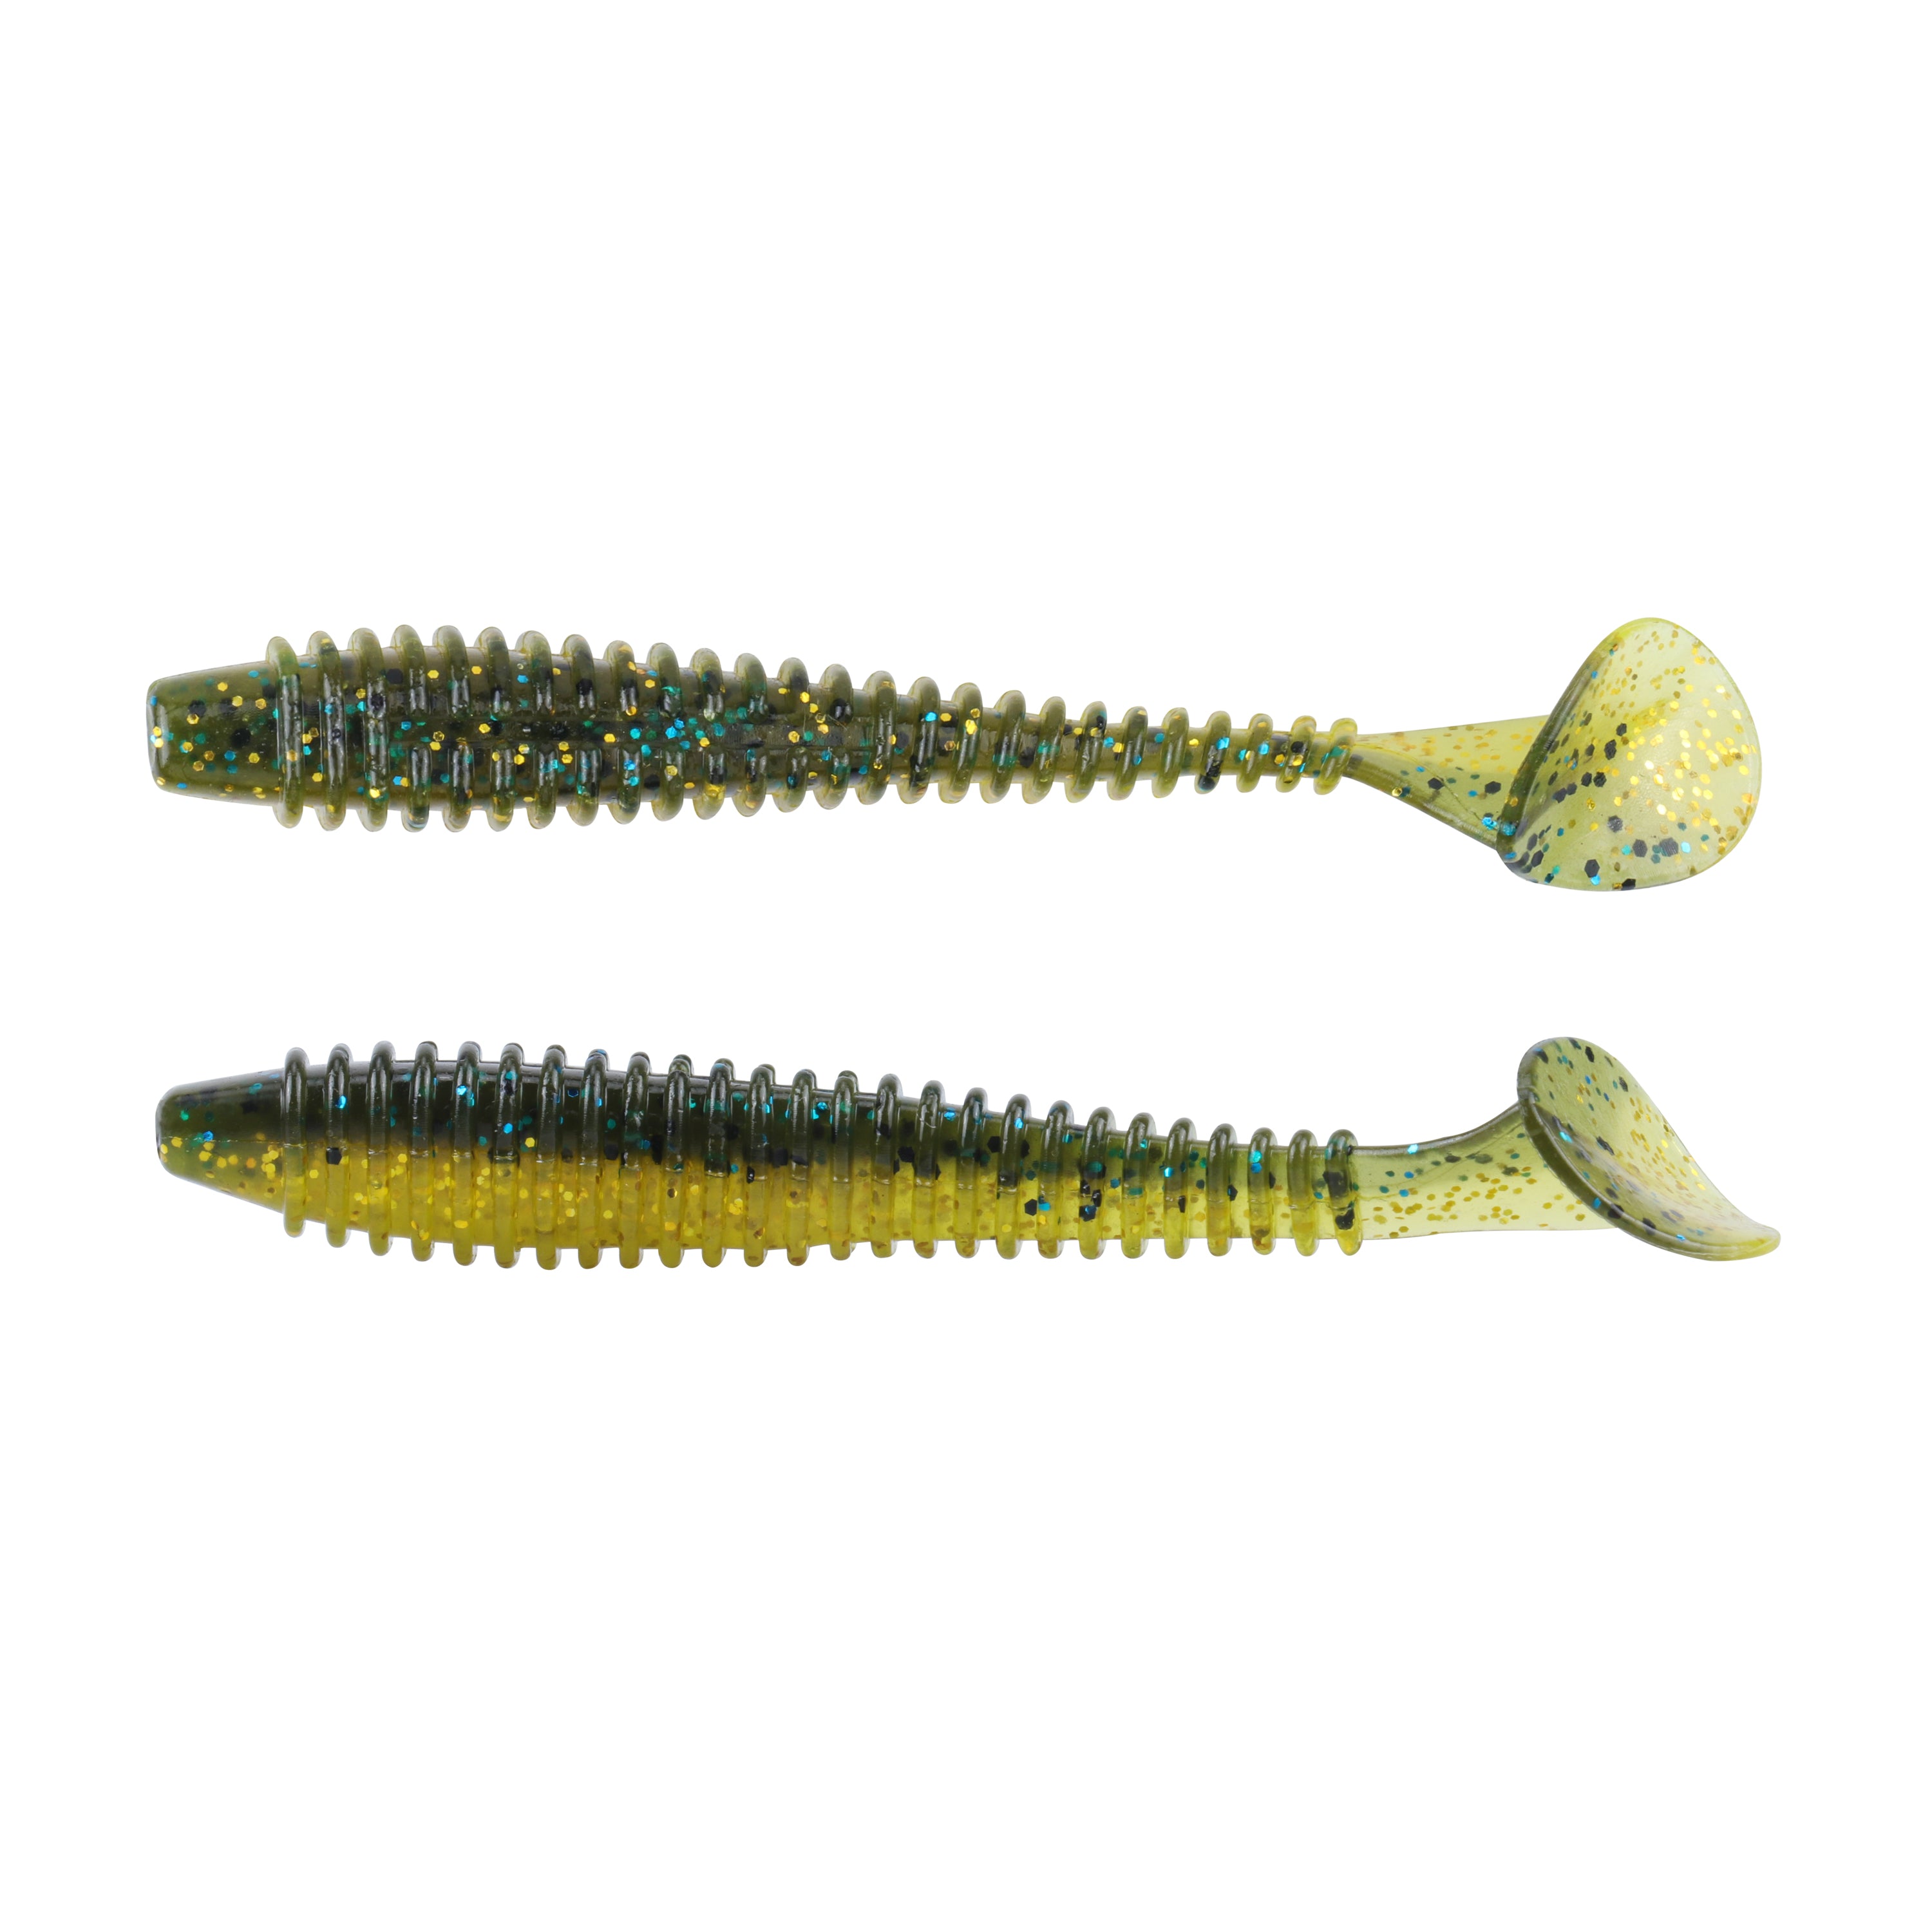 RUNCL ProBite Flat Paddle Tail Swimbaits - 3inch/20pk / Brown Shine